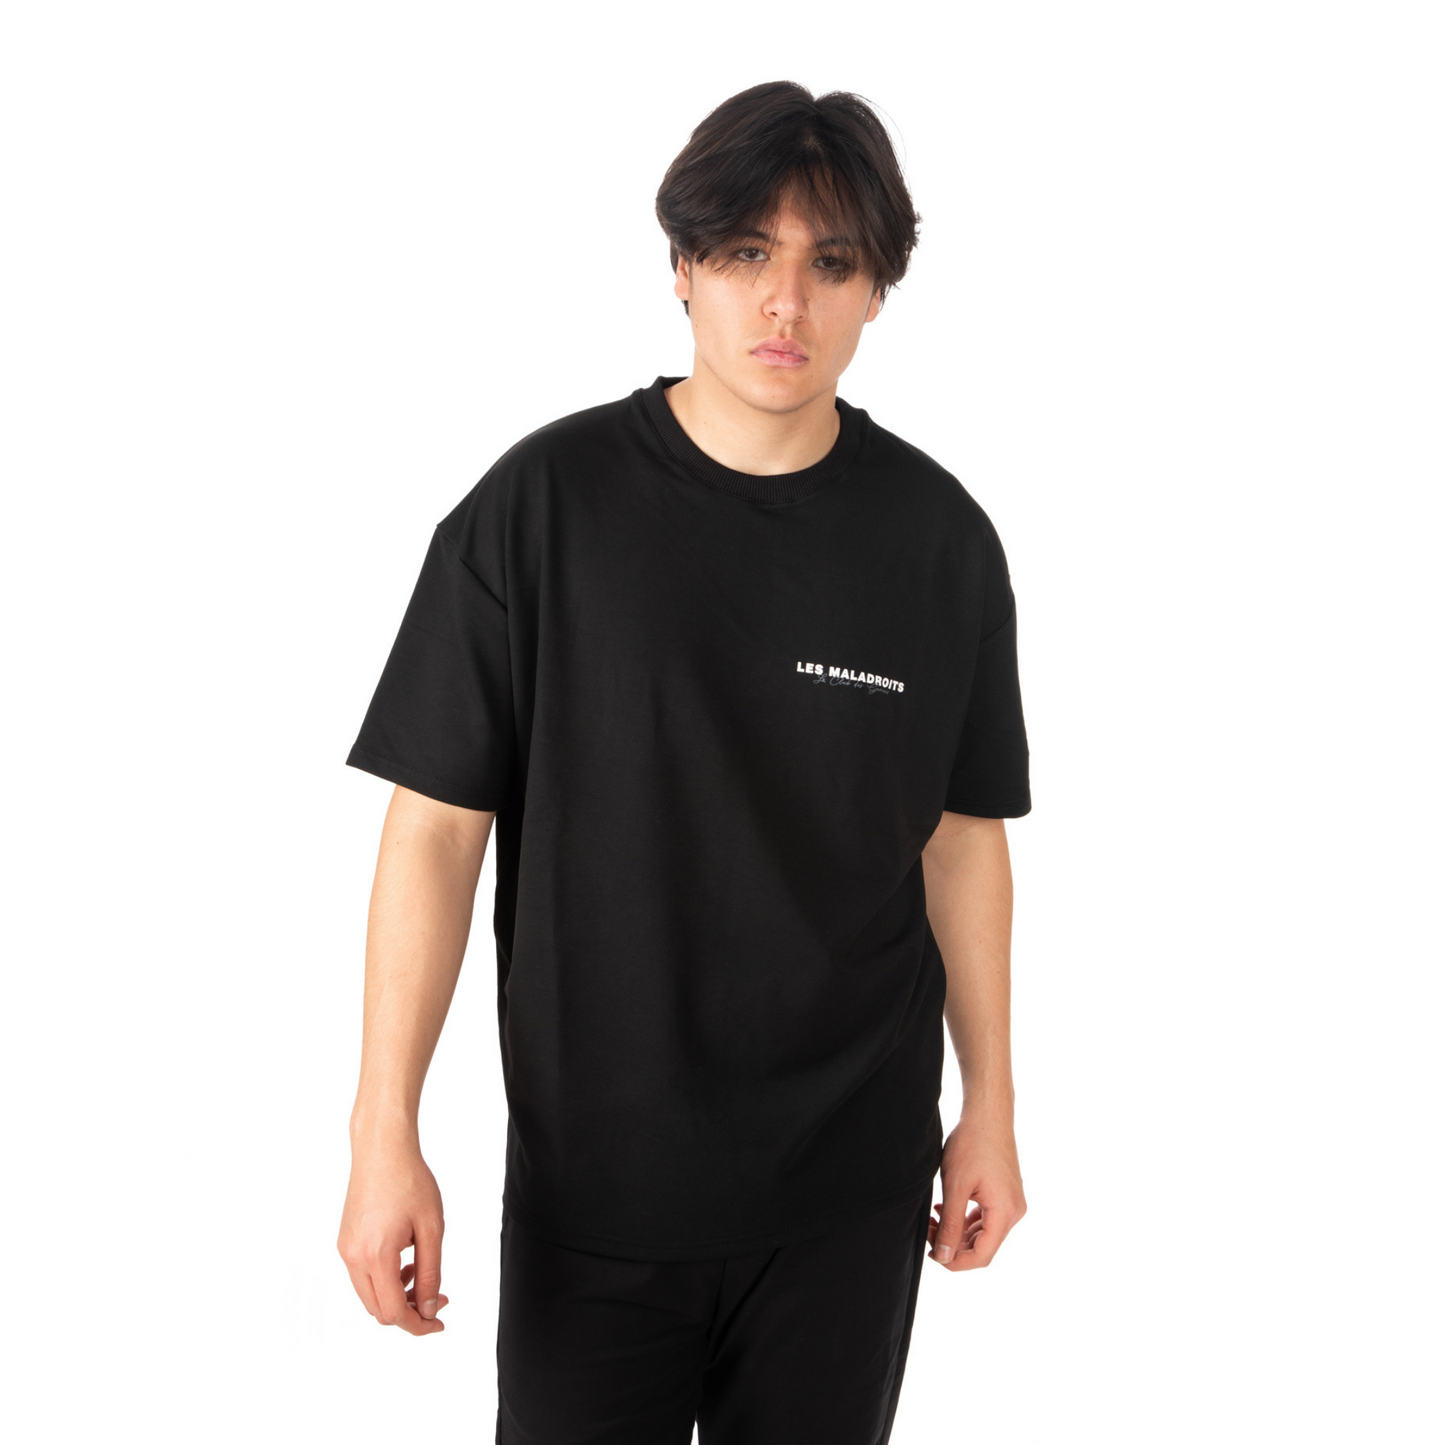 Unisex Oversized Black T-shirt Le Club des Gamins zoomed view on male model